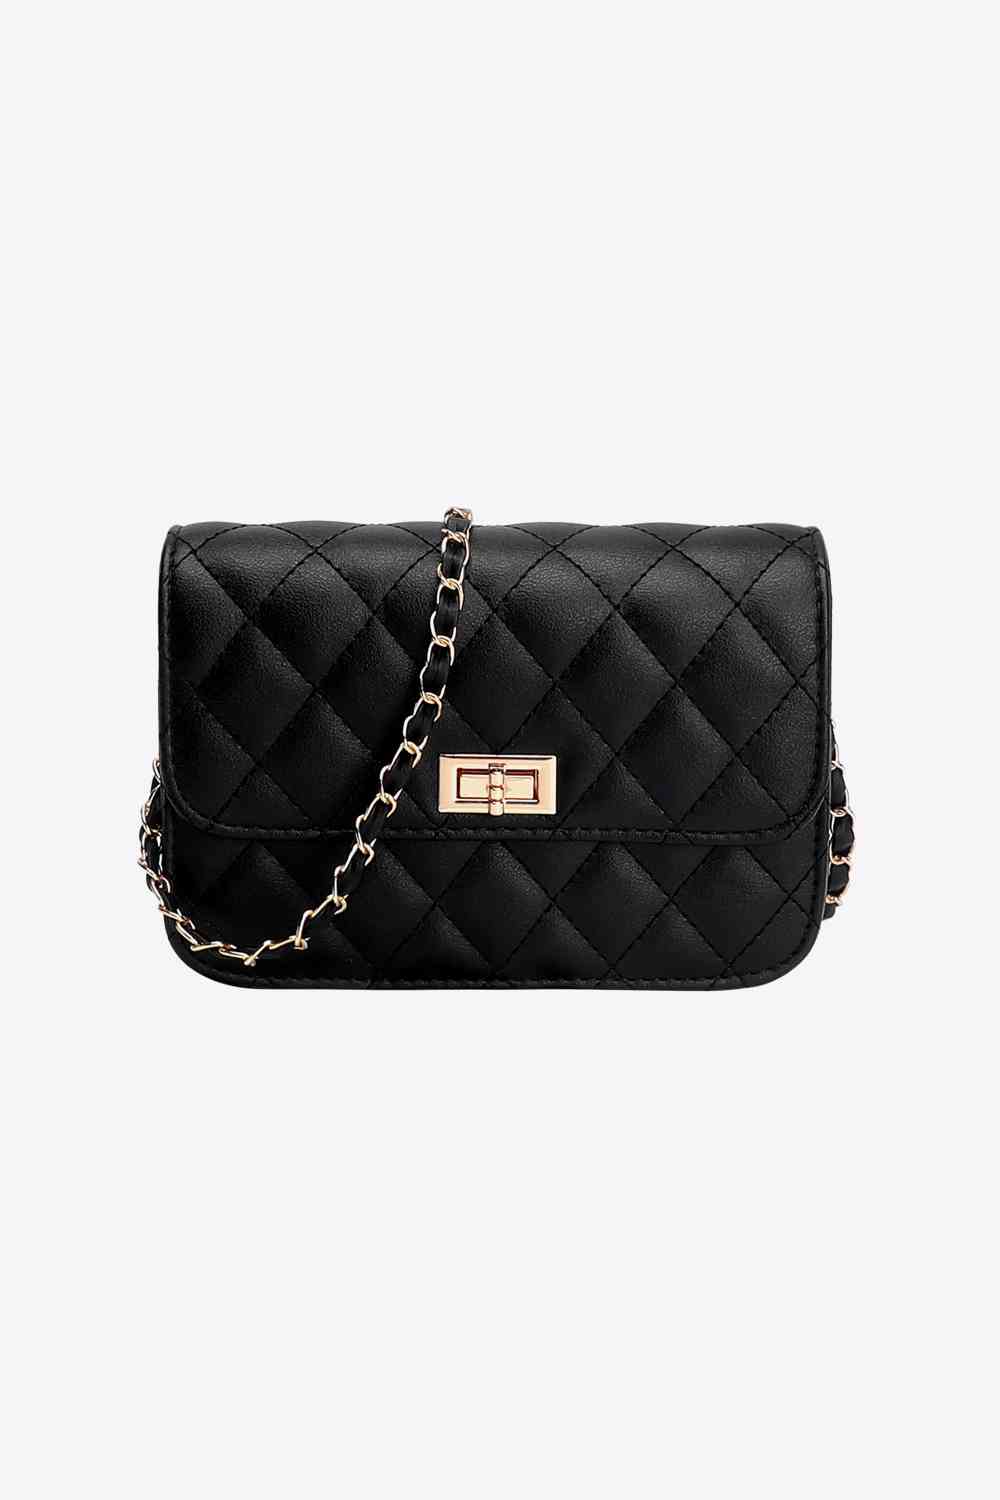 Wholesale Small PU Leather Crossbody Bag with Quilted Design: Chic and Sophisticated Black / One Size